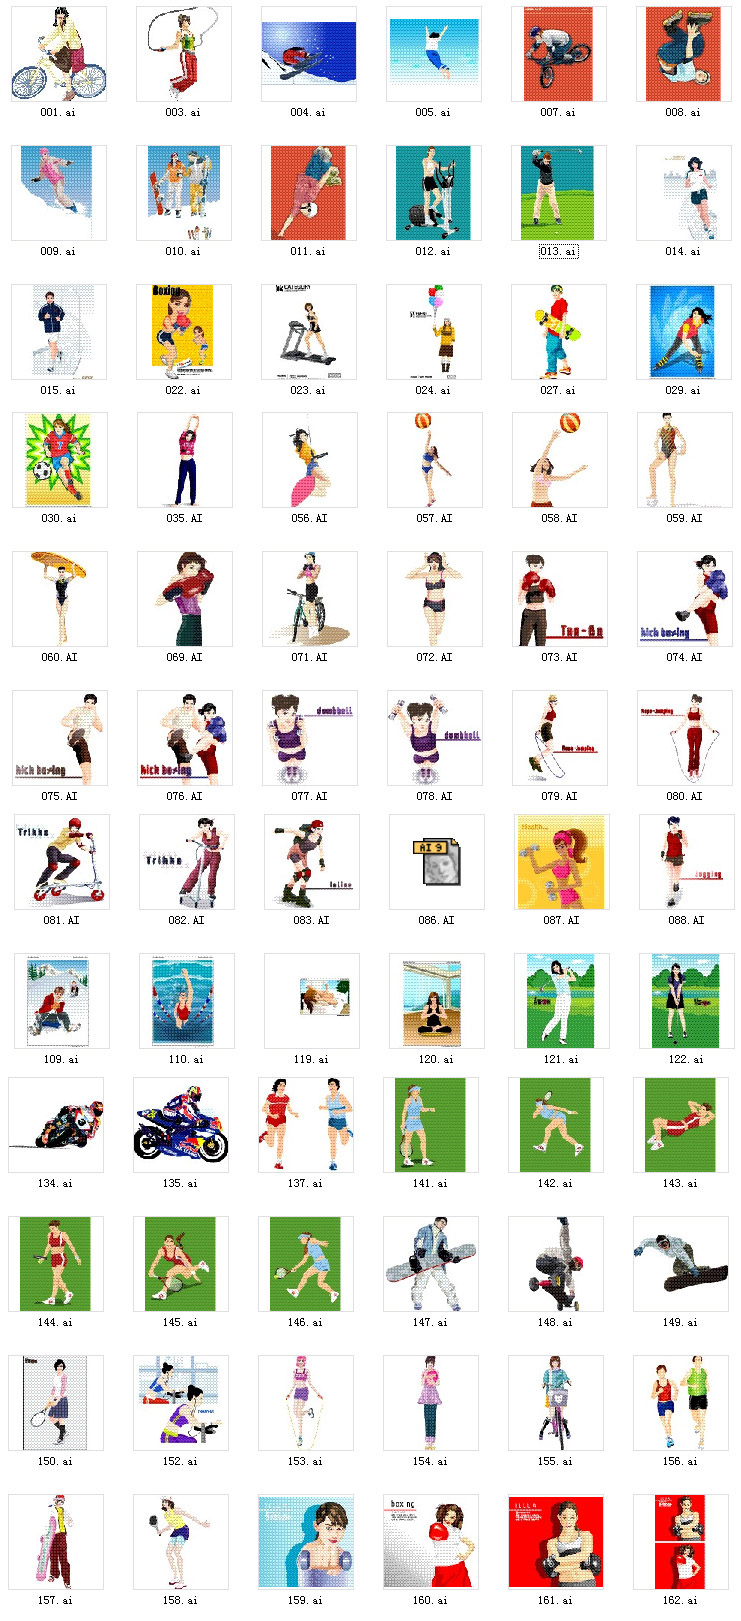 Free Sports Vector Graphics